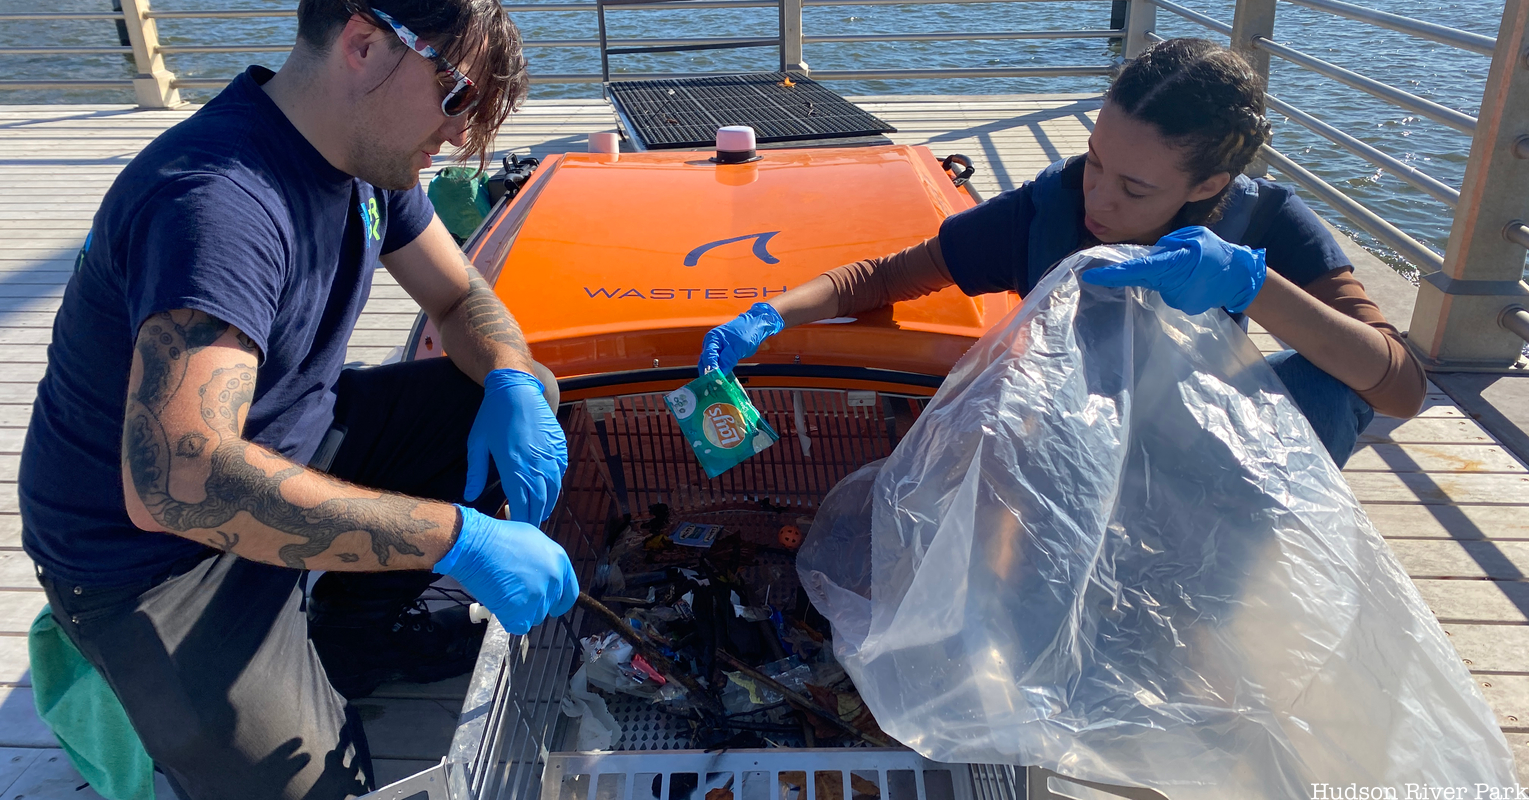 Two volunteers remove waste from the WasteShark